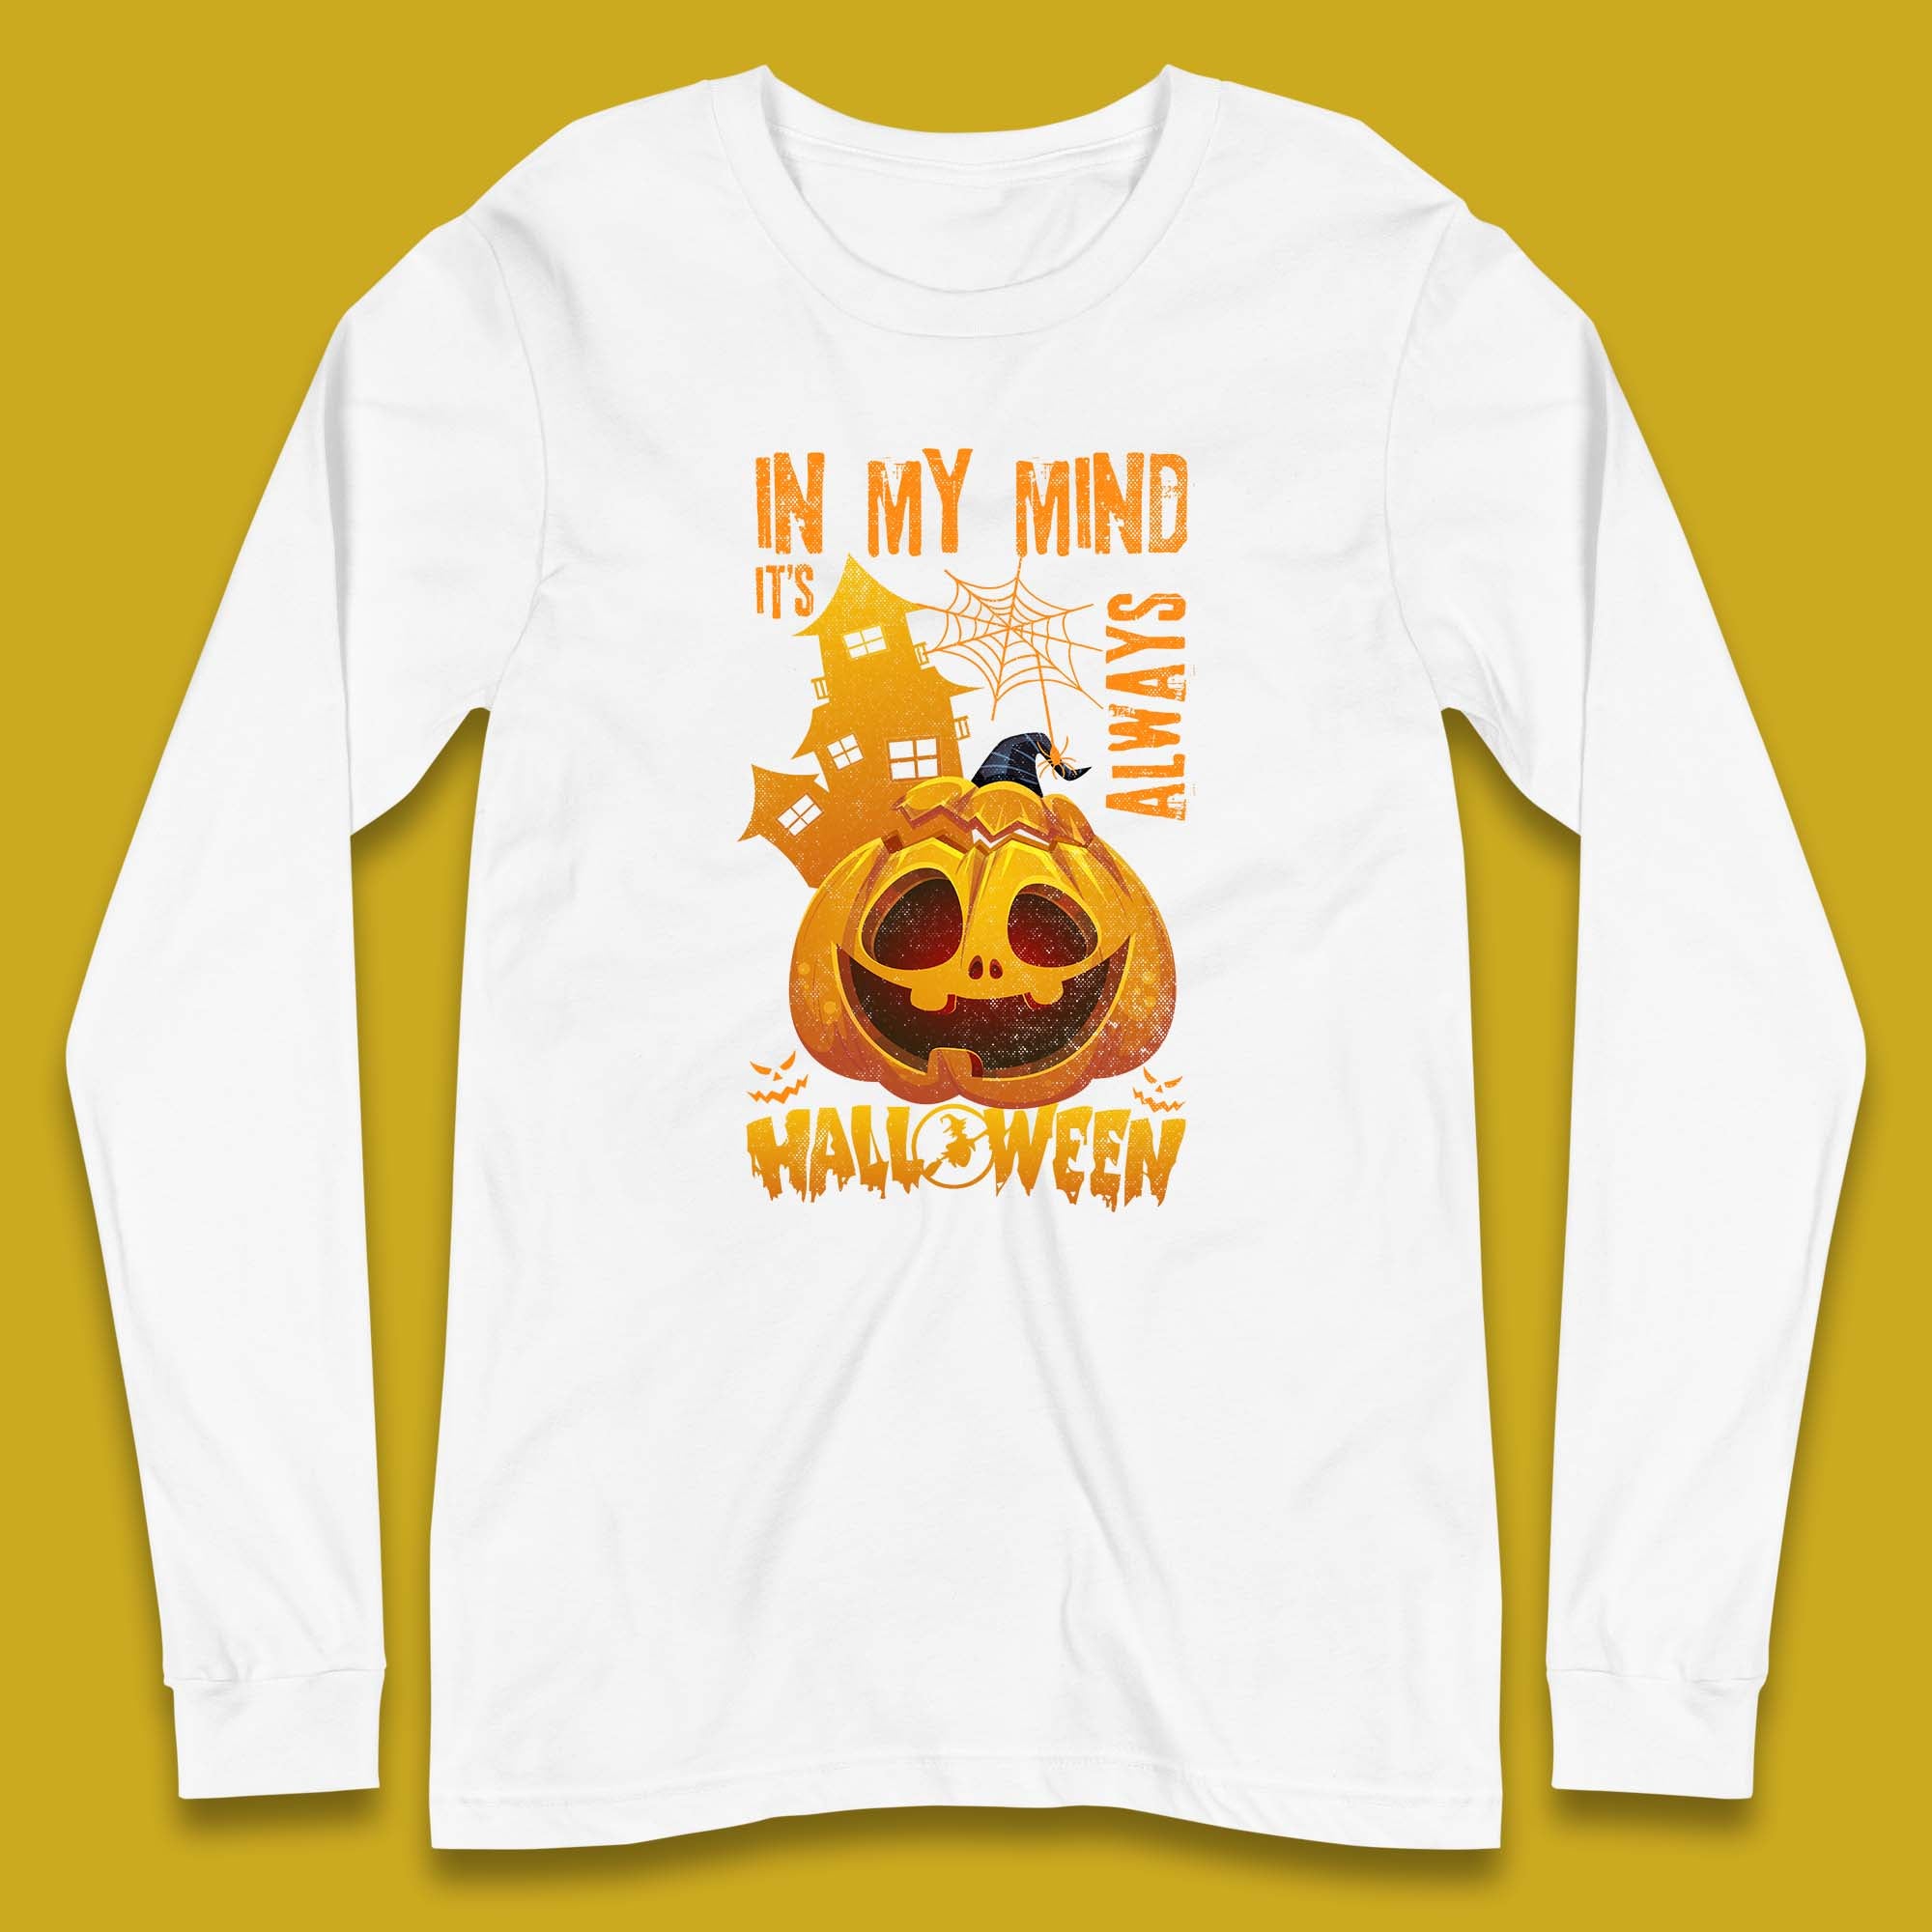 In My Mind It's Always Halloween Haunted House Horror Scary Monster Pumpkin Long Sleeve T Shirt